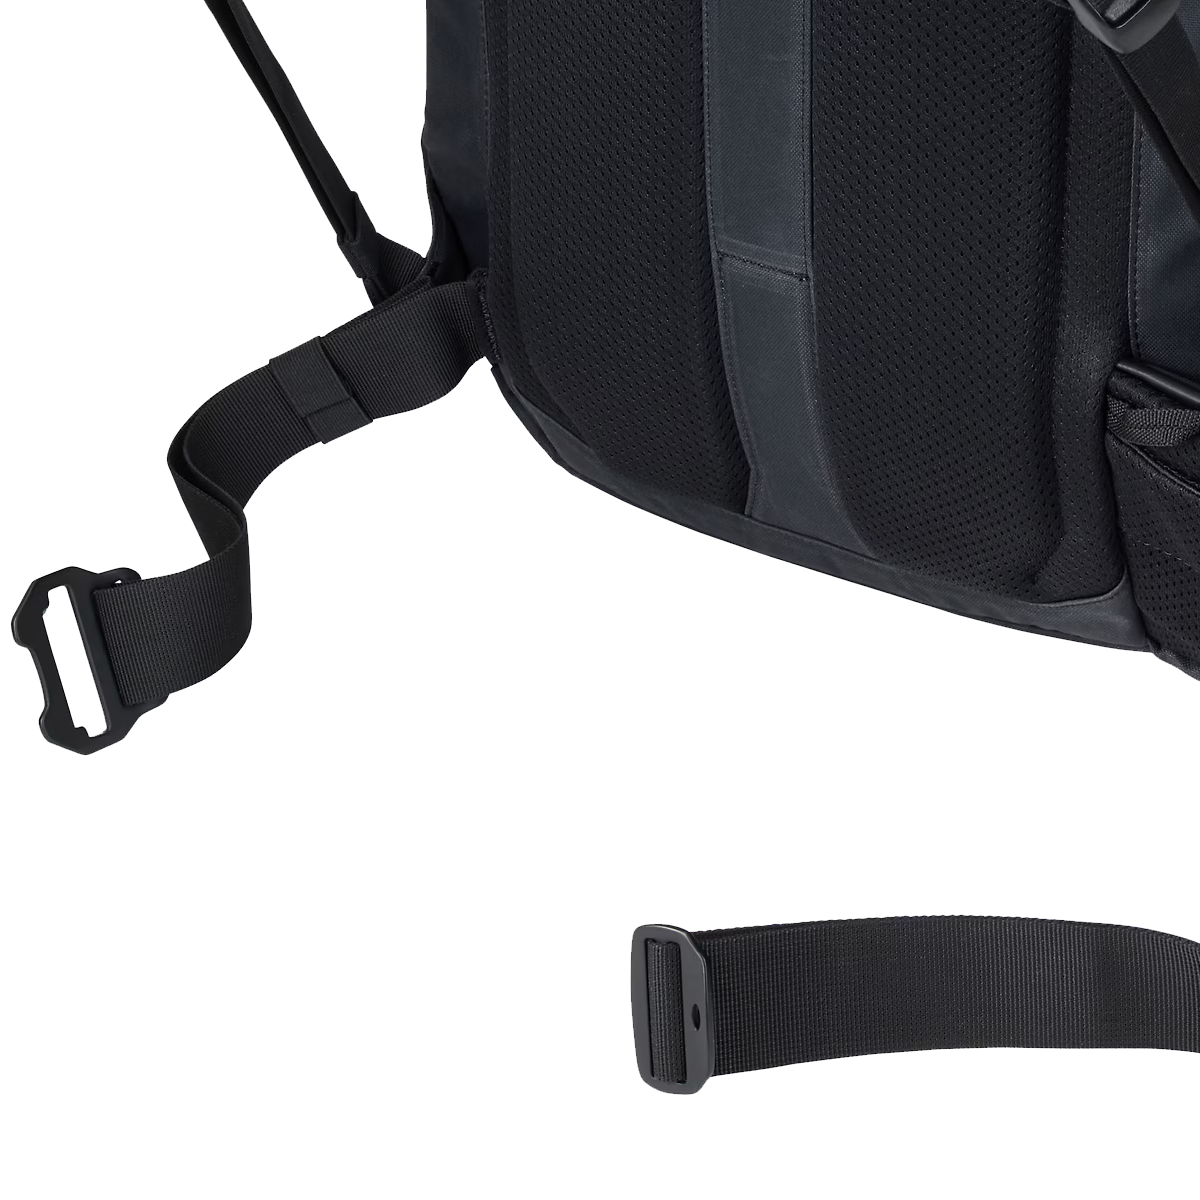 Aion Travel 40 L Backpack alternate view